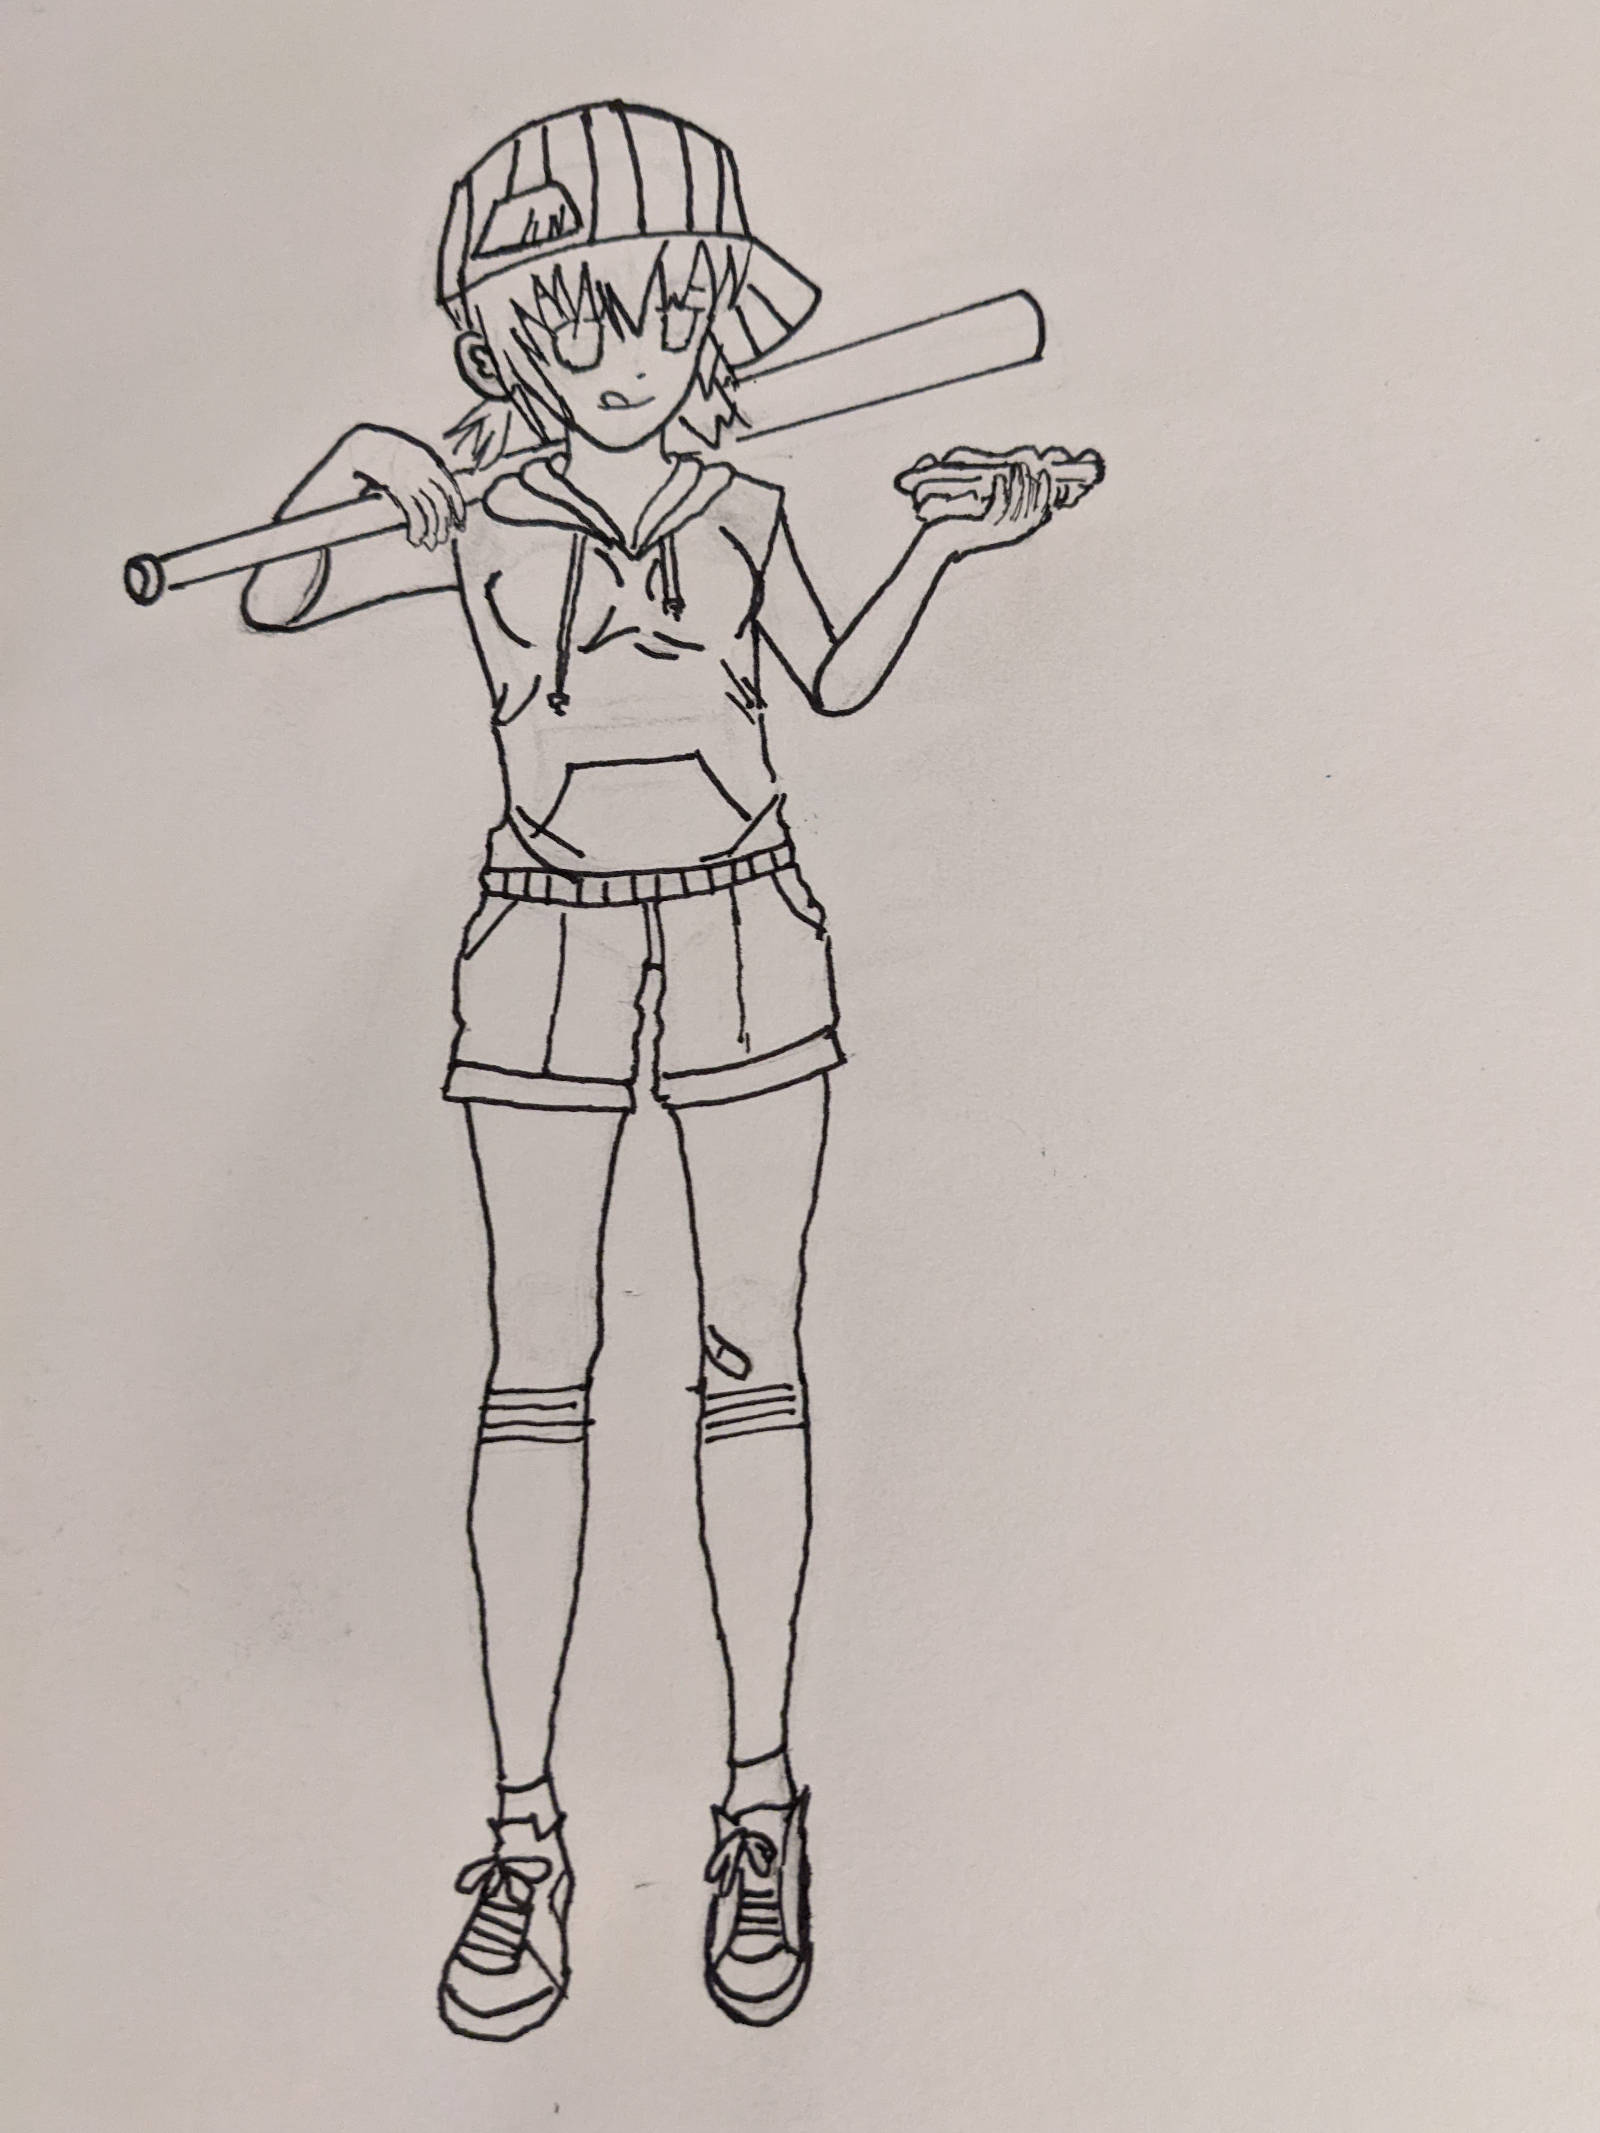 Girl holding a softball bat over her shoulder. In her left hand, holding a hotdog. Black and white.